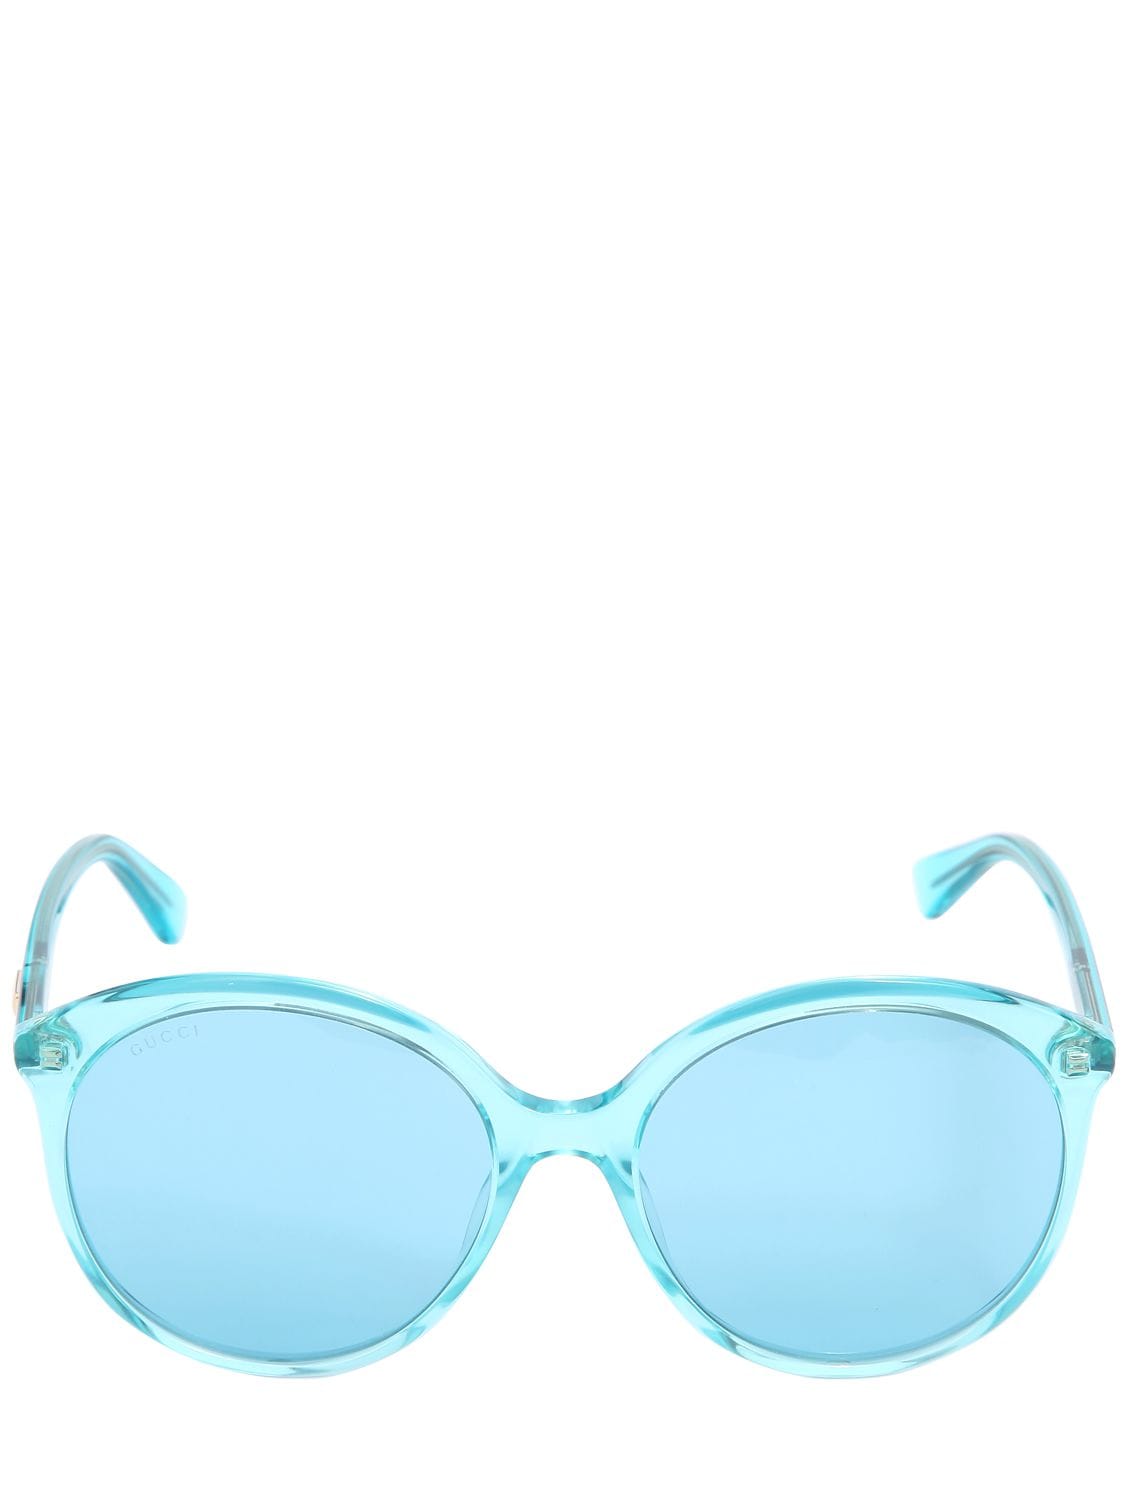 Gucci Oversize Round Sunglasses In Turquoise